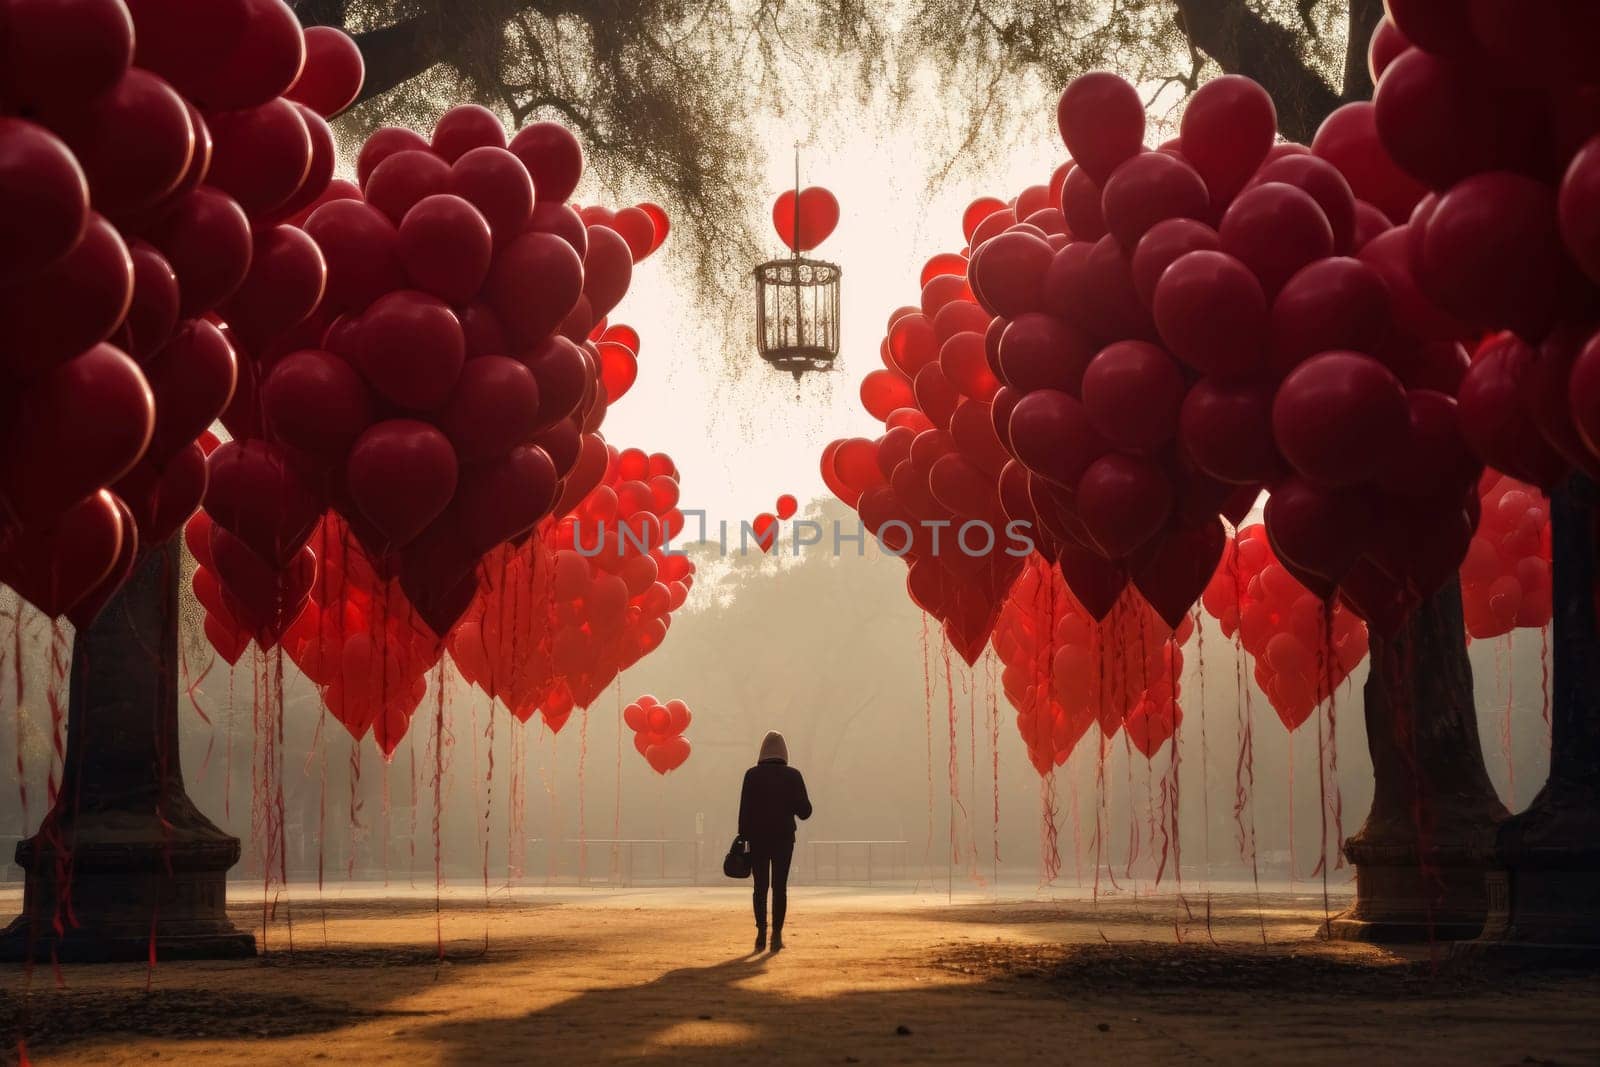 A solitary figure walks through a dreamlike forest aglow with sunrise, the path adorned with romantic red heart-shaped balloons.